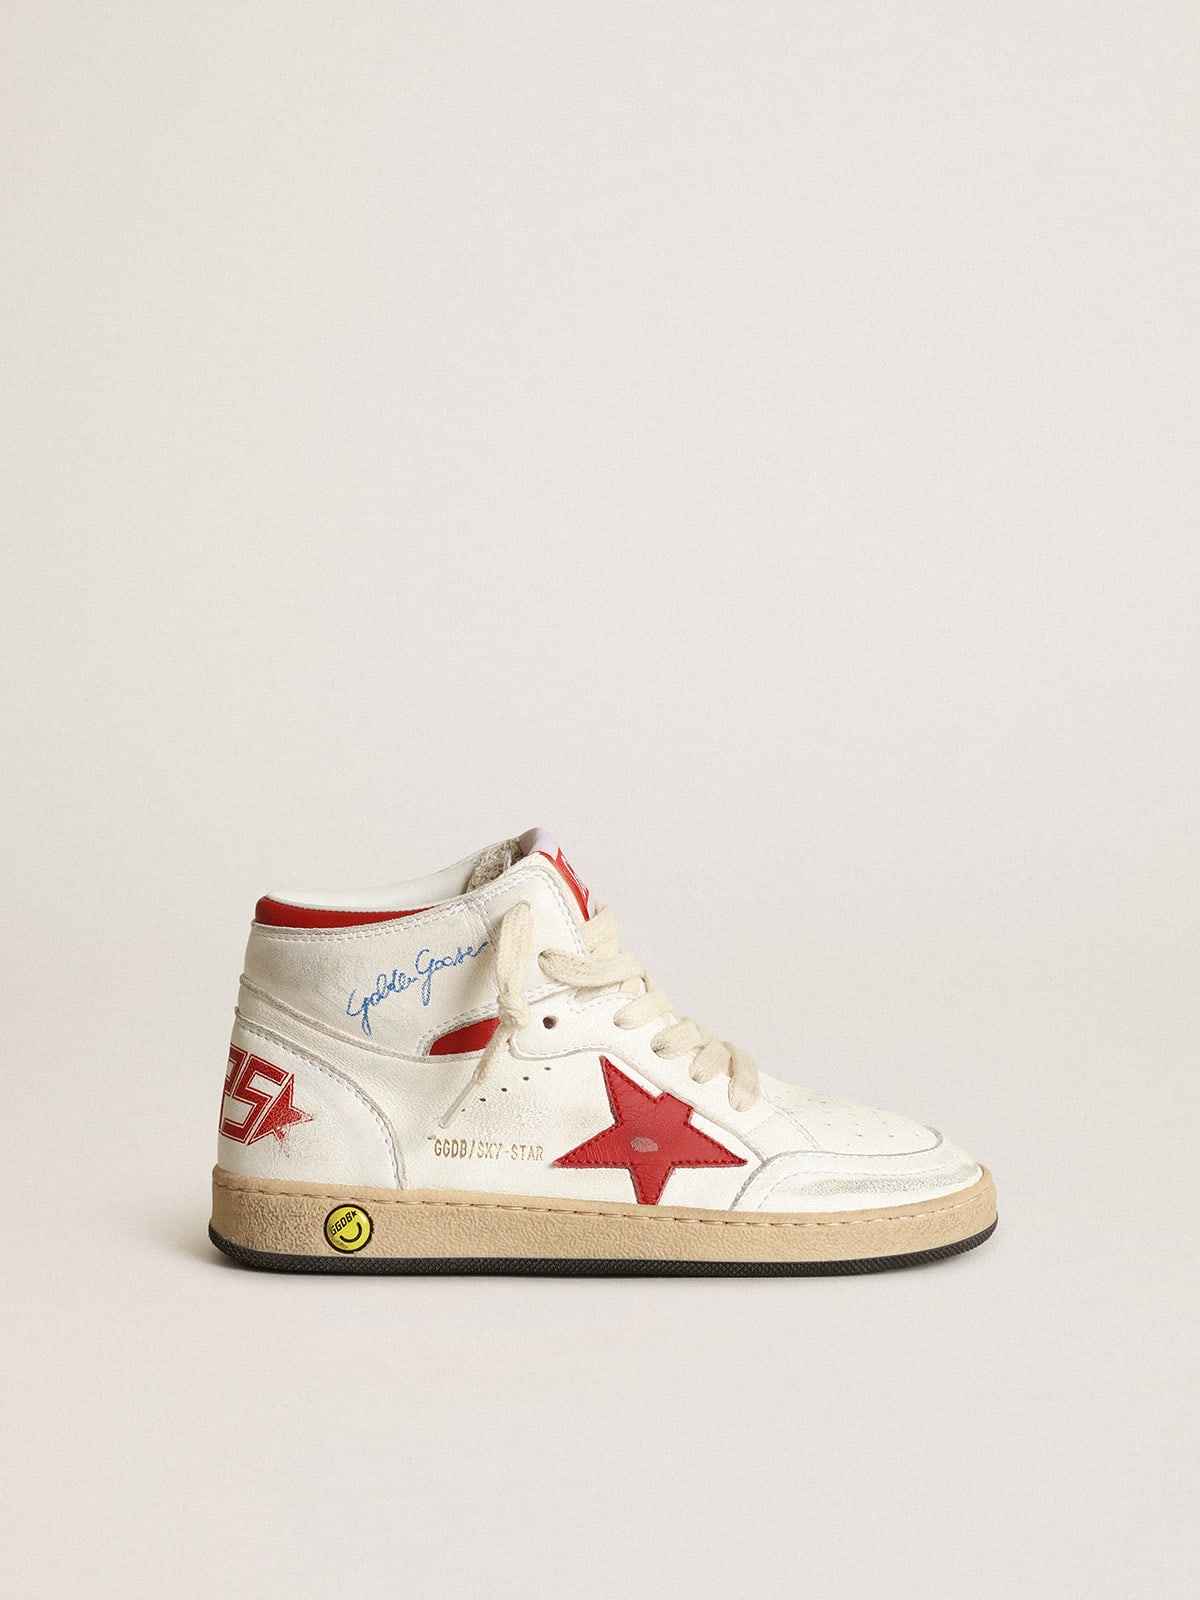 Young Sky-Star sneakers in white nappa leather with red leather star and heel tab